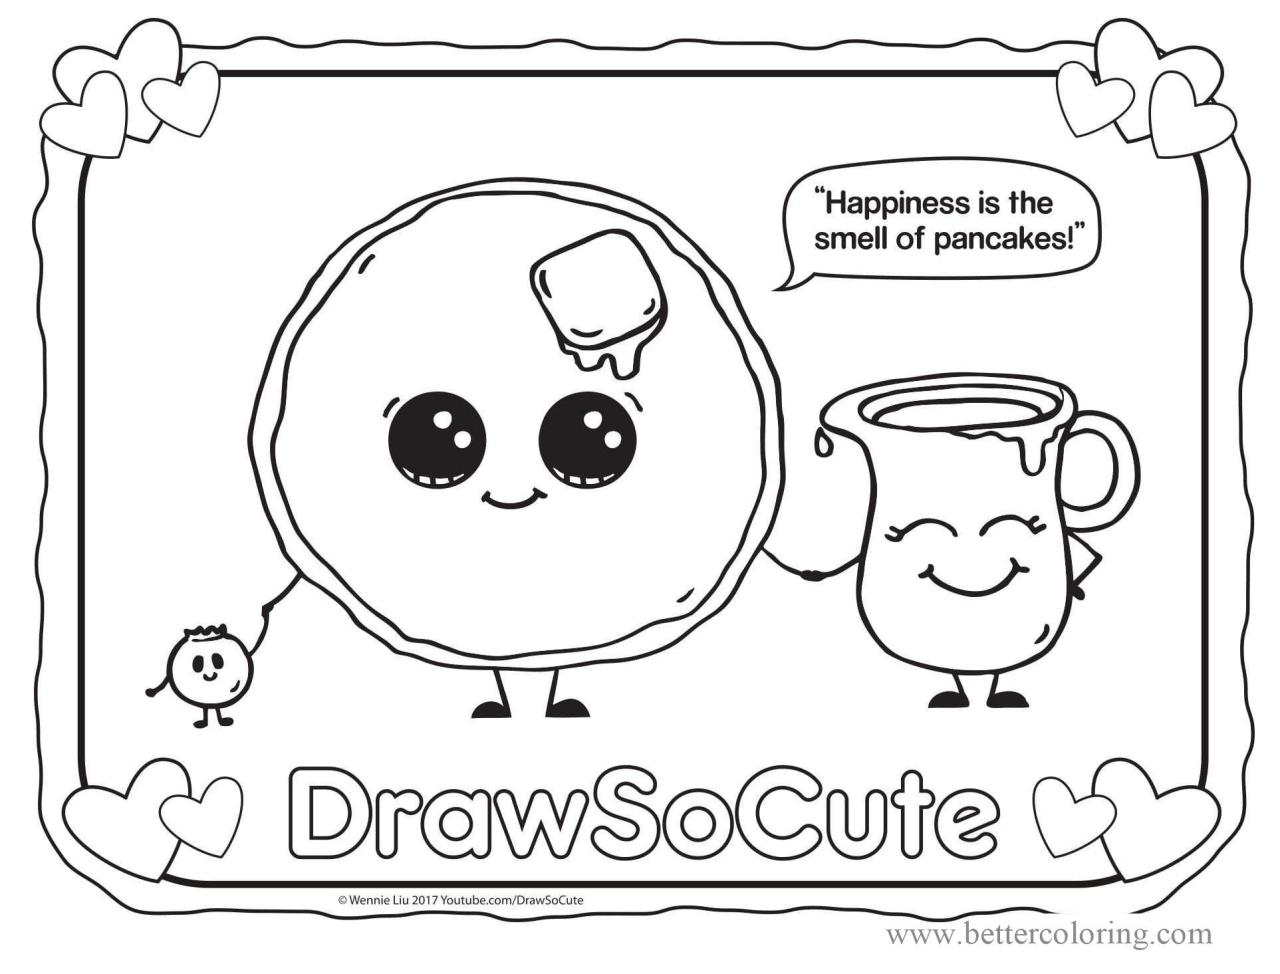 Draw So Cute Pancake Coloring Pages Free Printable Coloring Pages